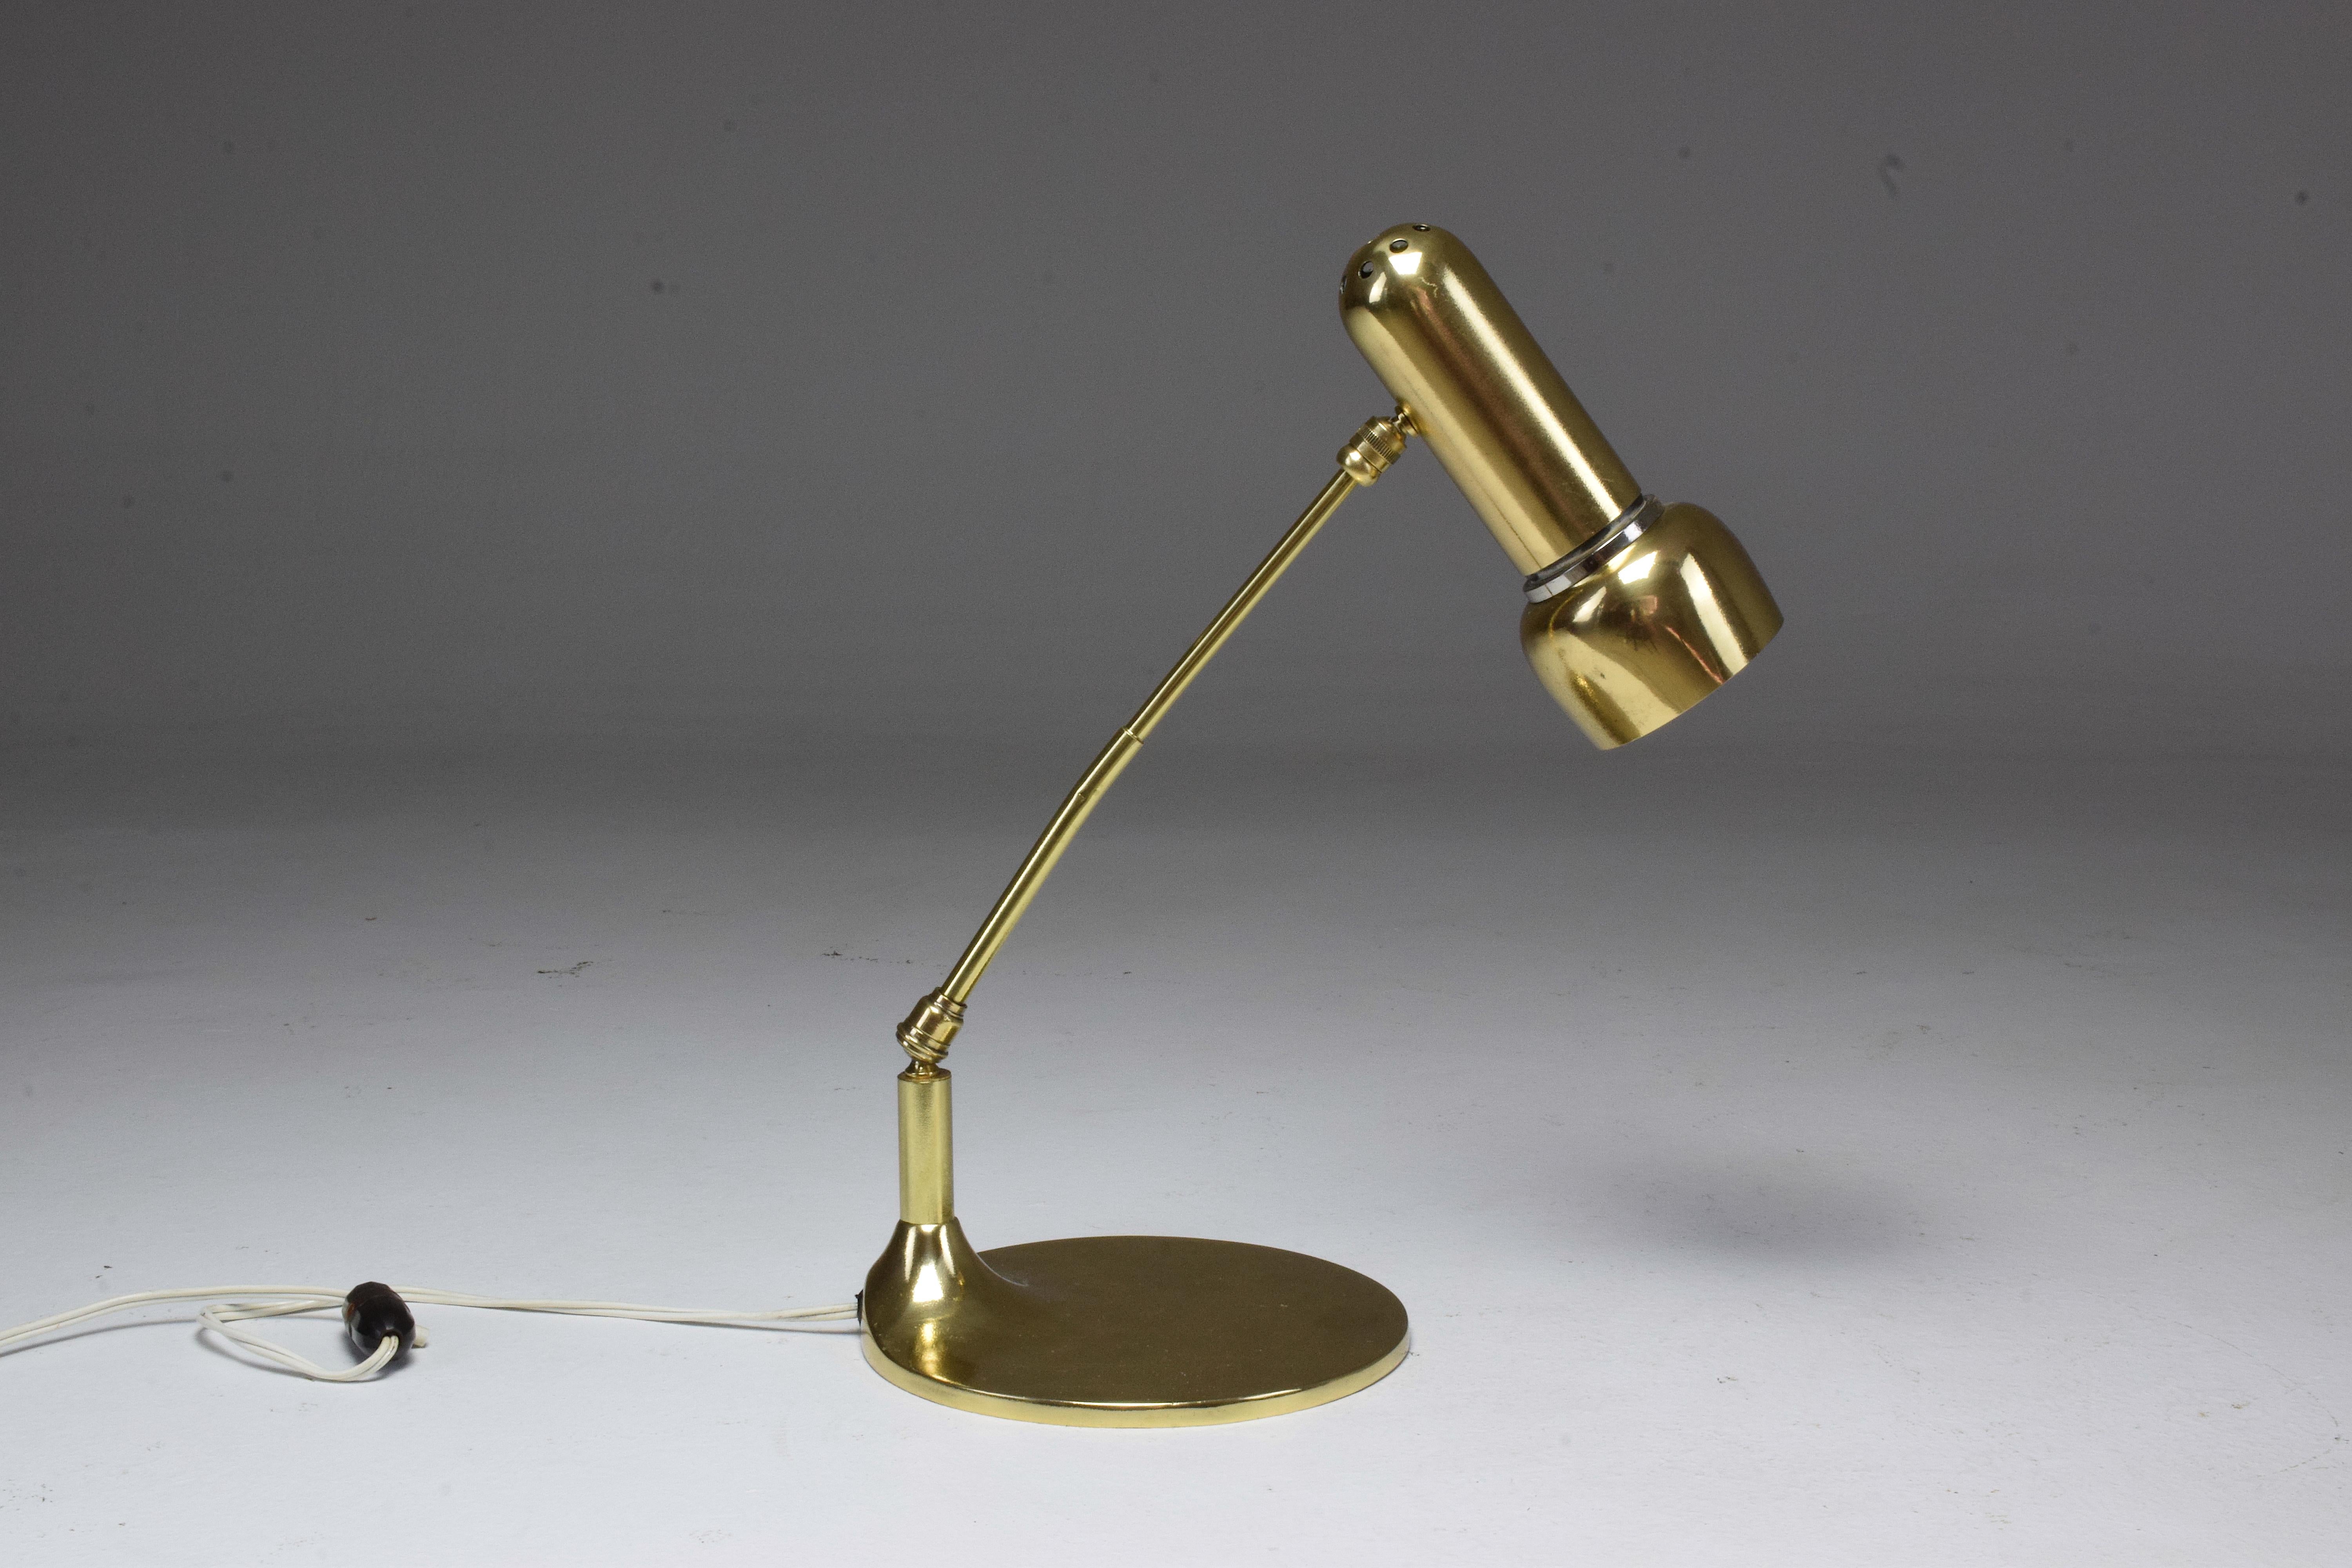 20th century vintage Italian table accent or desk lamp which articulates at the base and the shade designed in an organic aged brass structure of Industrial style.
Italy, circa the 1950s.

We are an exhibition space and an online destination